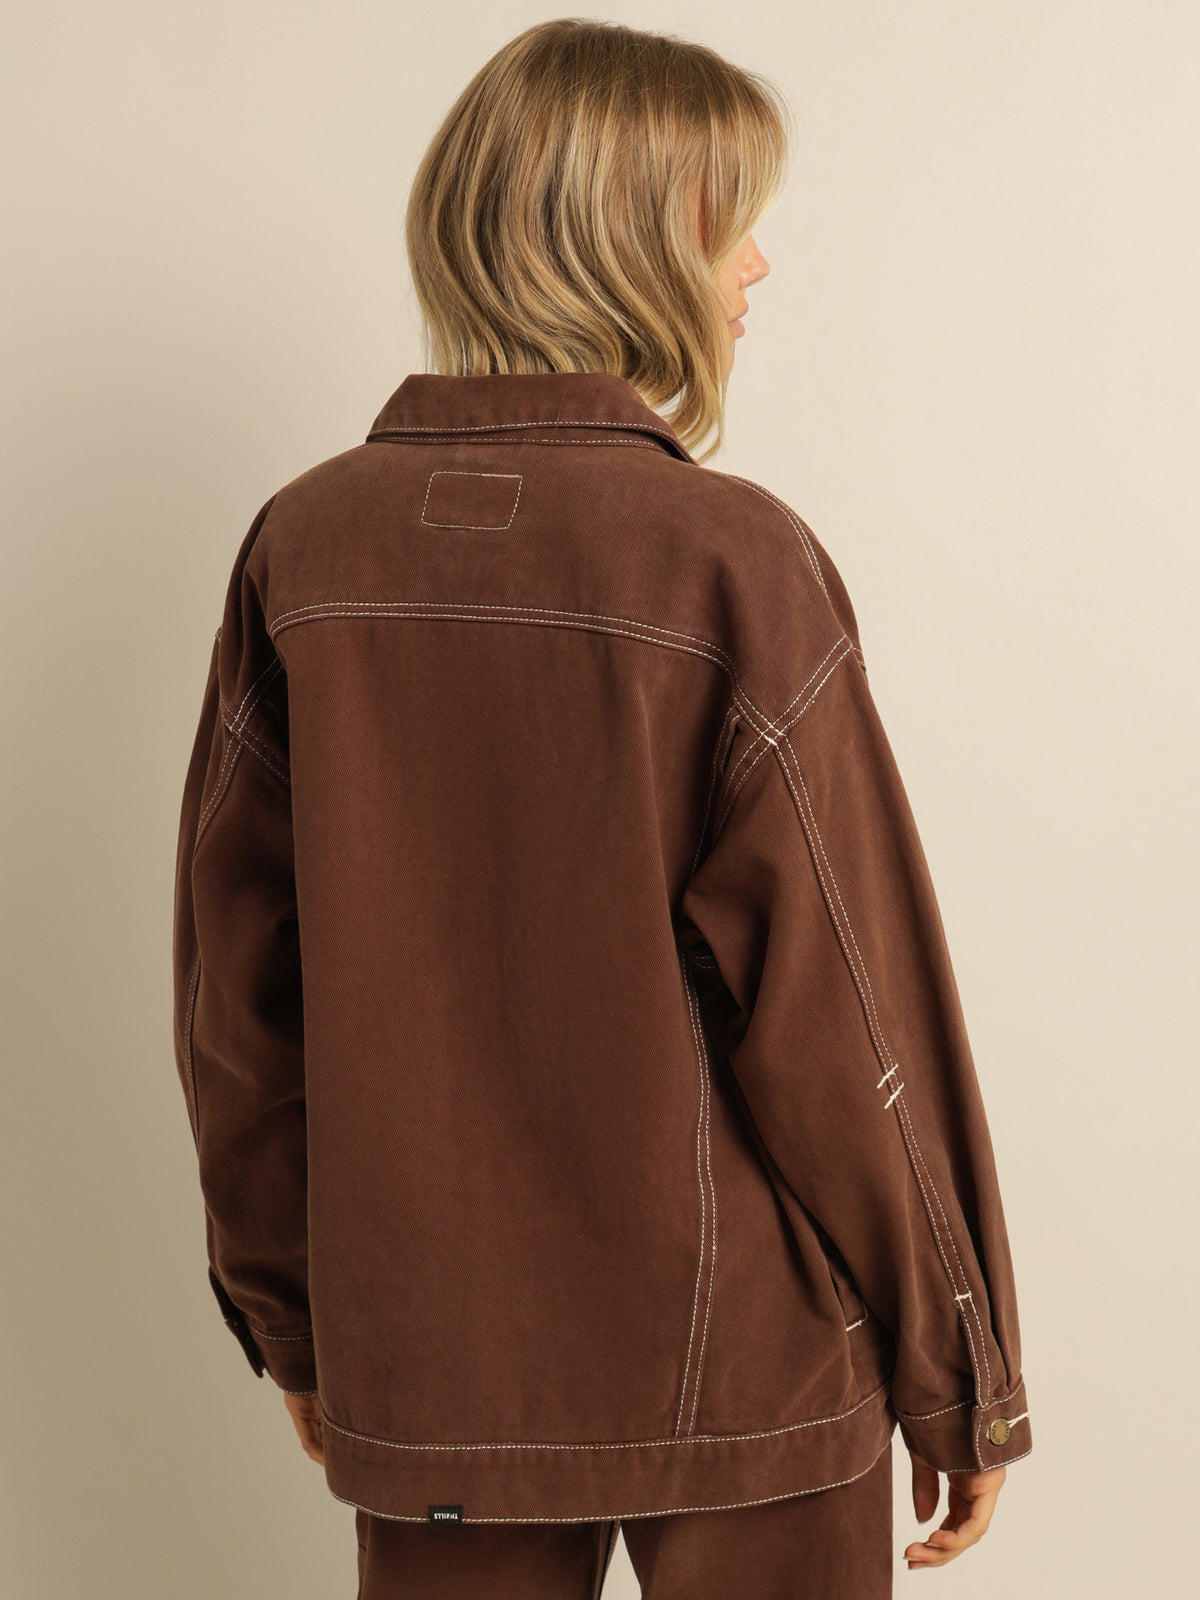 Madi Jacket in Washed Cocoa